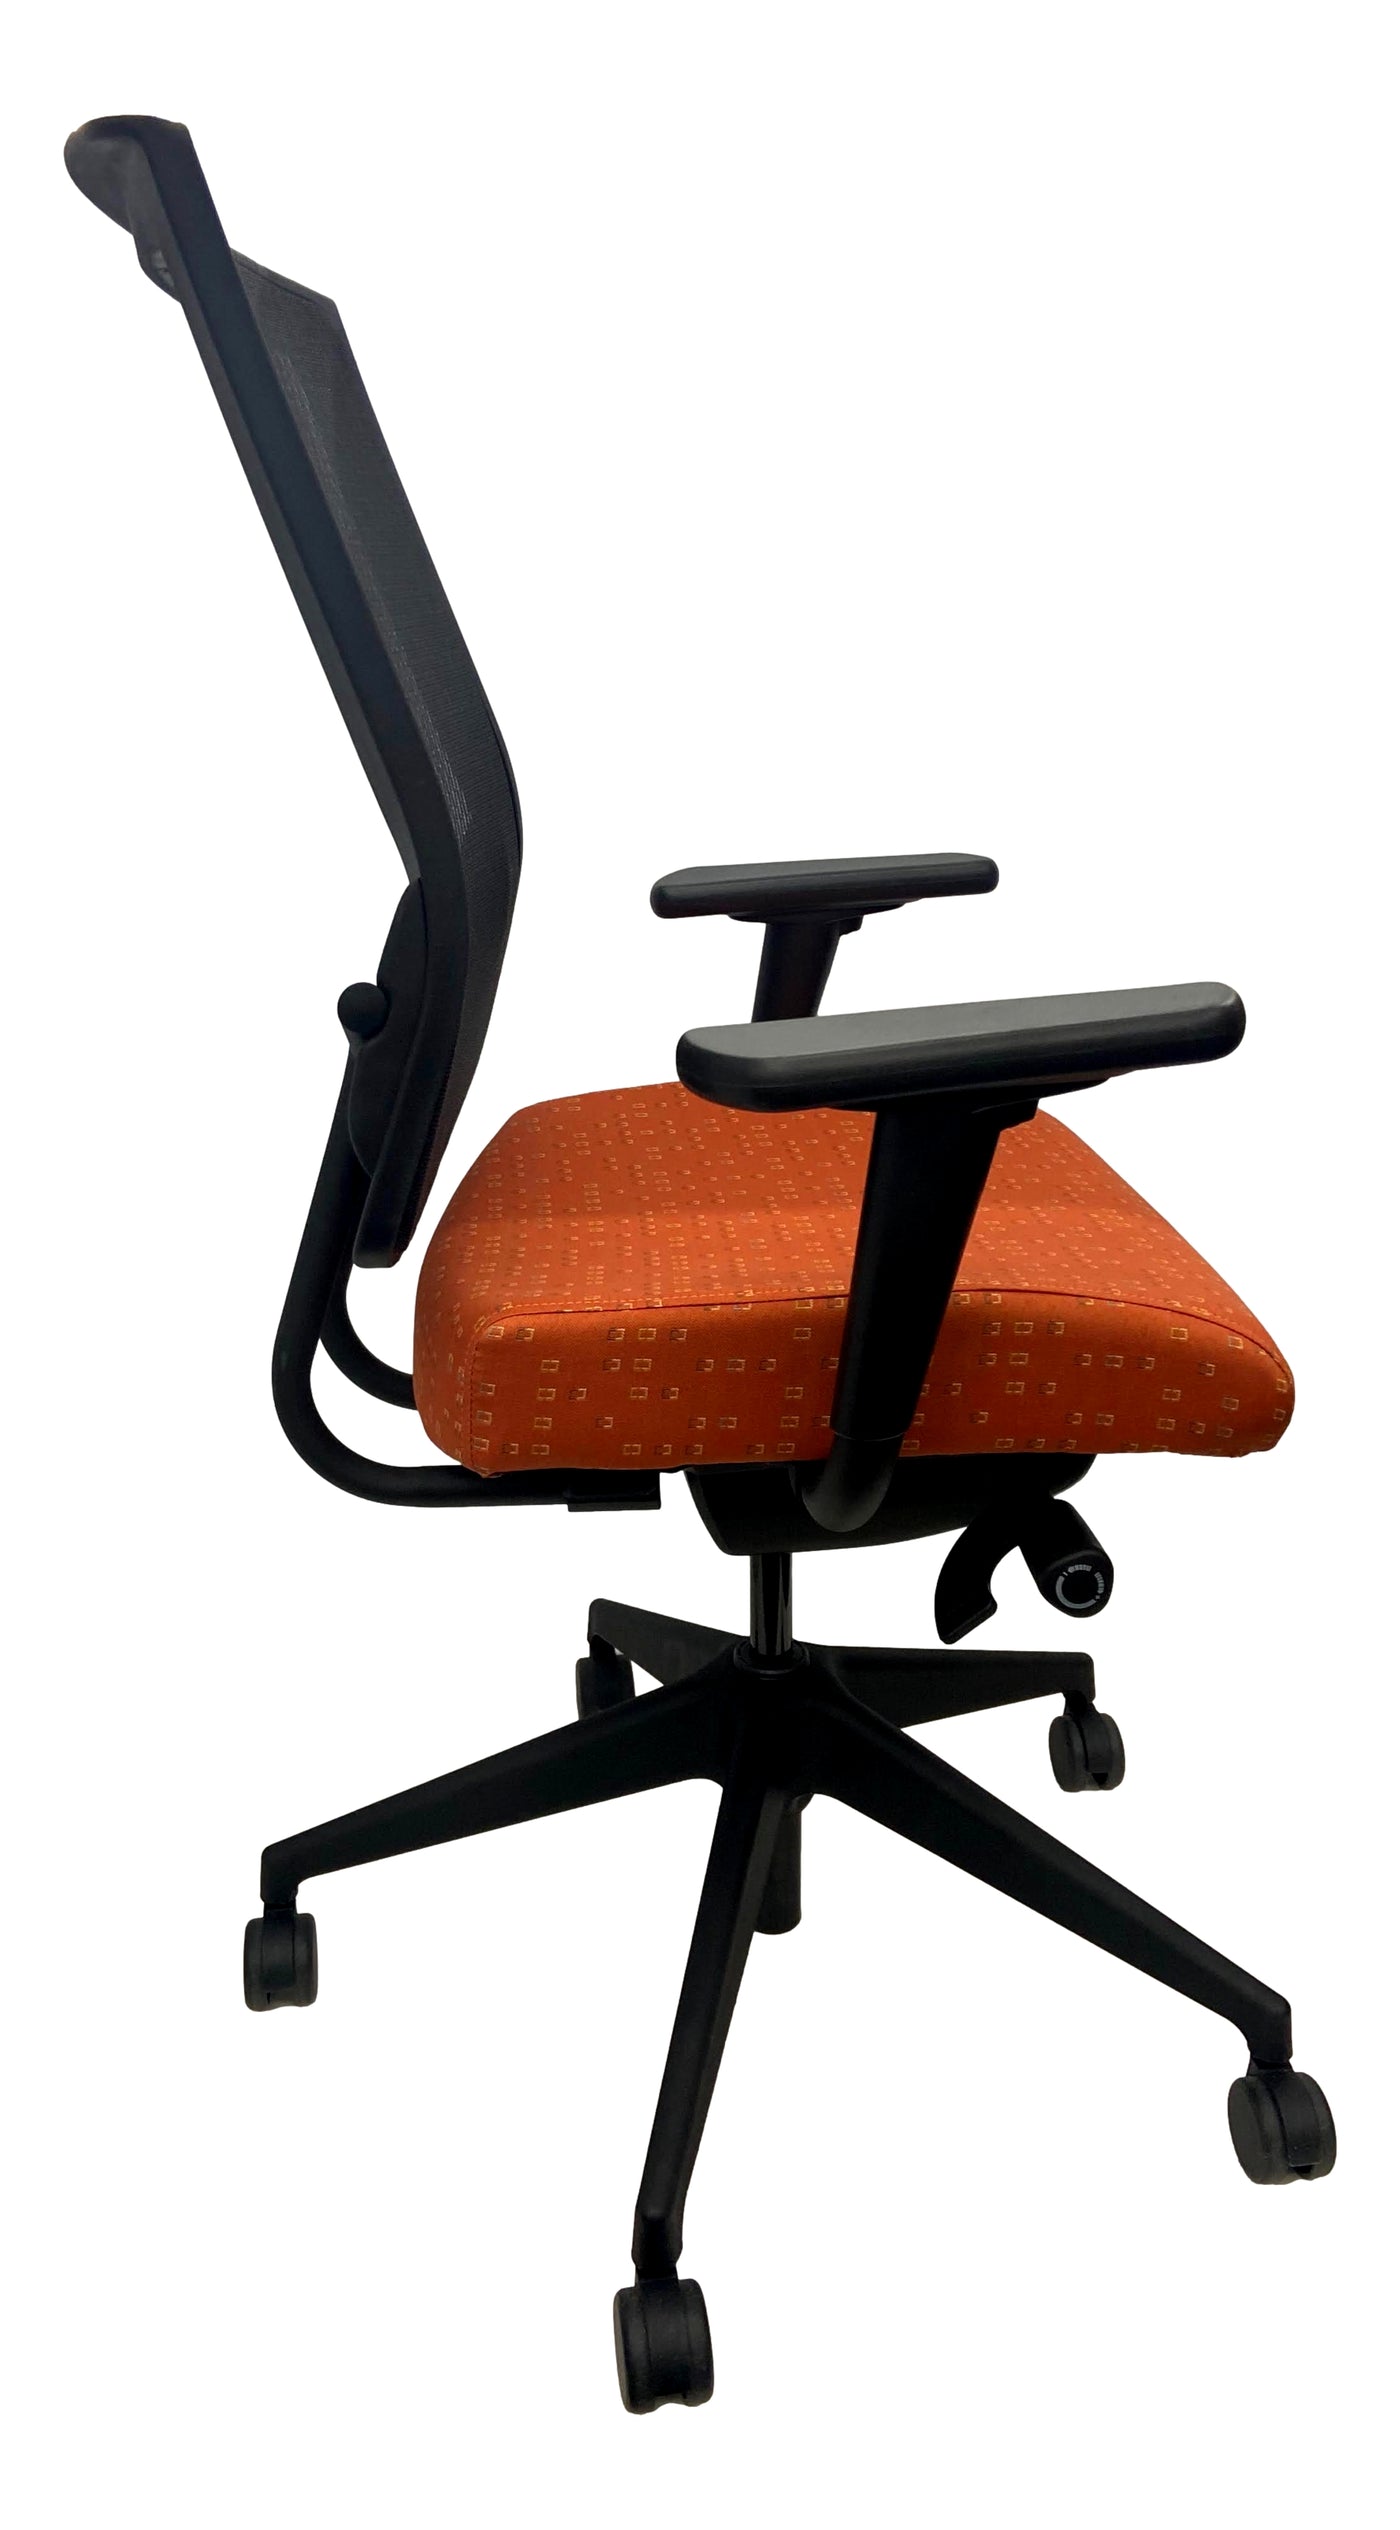 SitOnIt Seating Focus Side Chair - Brand New